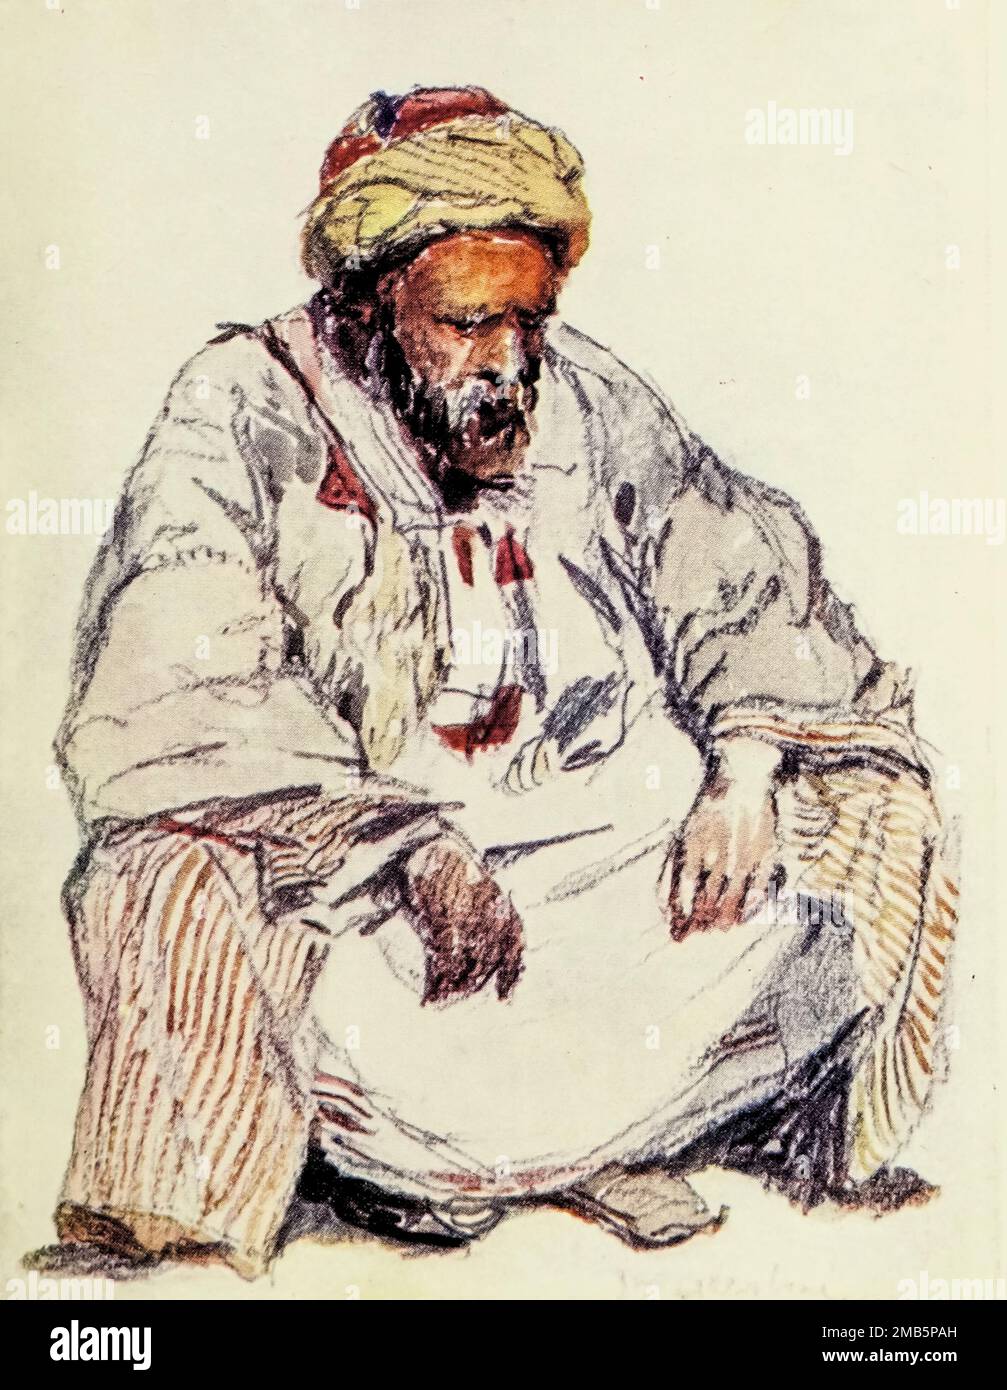 Seated figure of Syrian Shepherd in Sheepskin Coat Painted by John Fulleylove from the book ' The Holy land ' Described by John Kelman 1864-1929 Publication date 1902 Publisher London : A. & C. Black Stock Photo